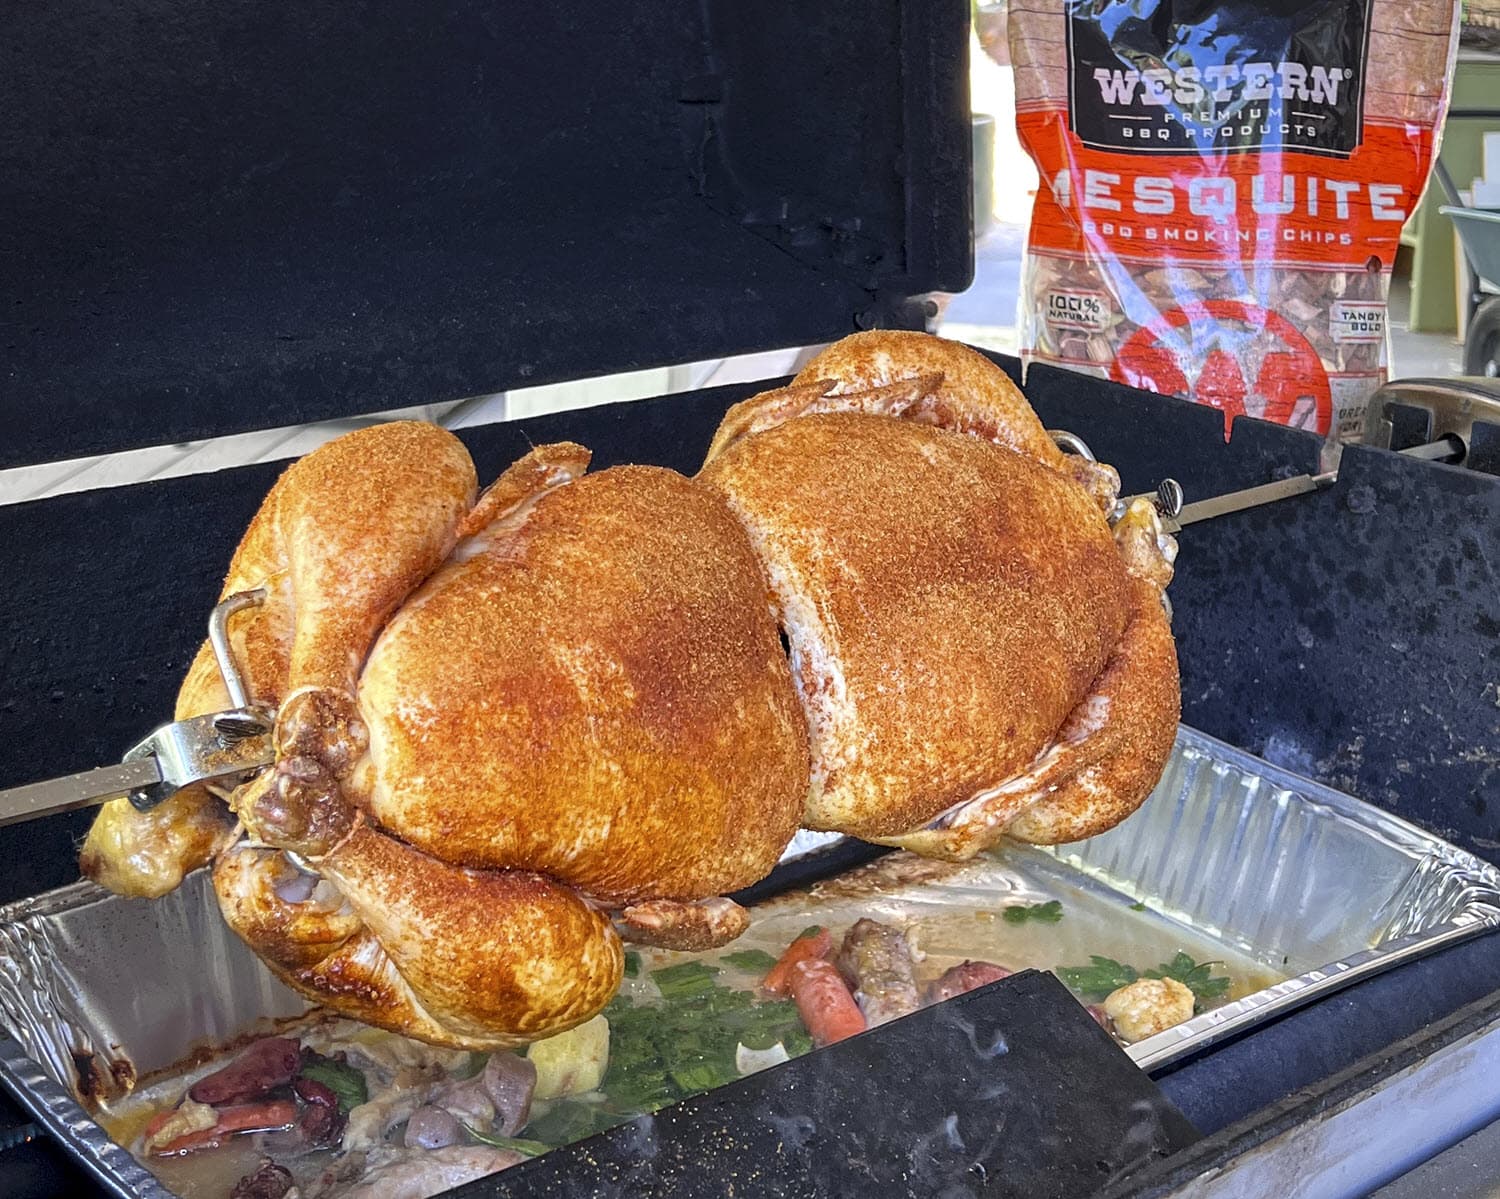 Spiced Rotisserie chickens on spit rod with Western Mesquite Smoking Chips bag in background